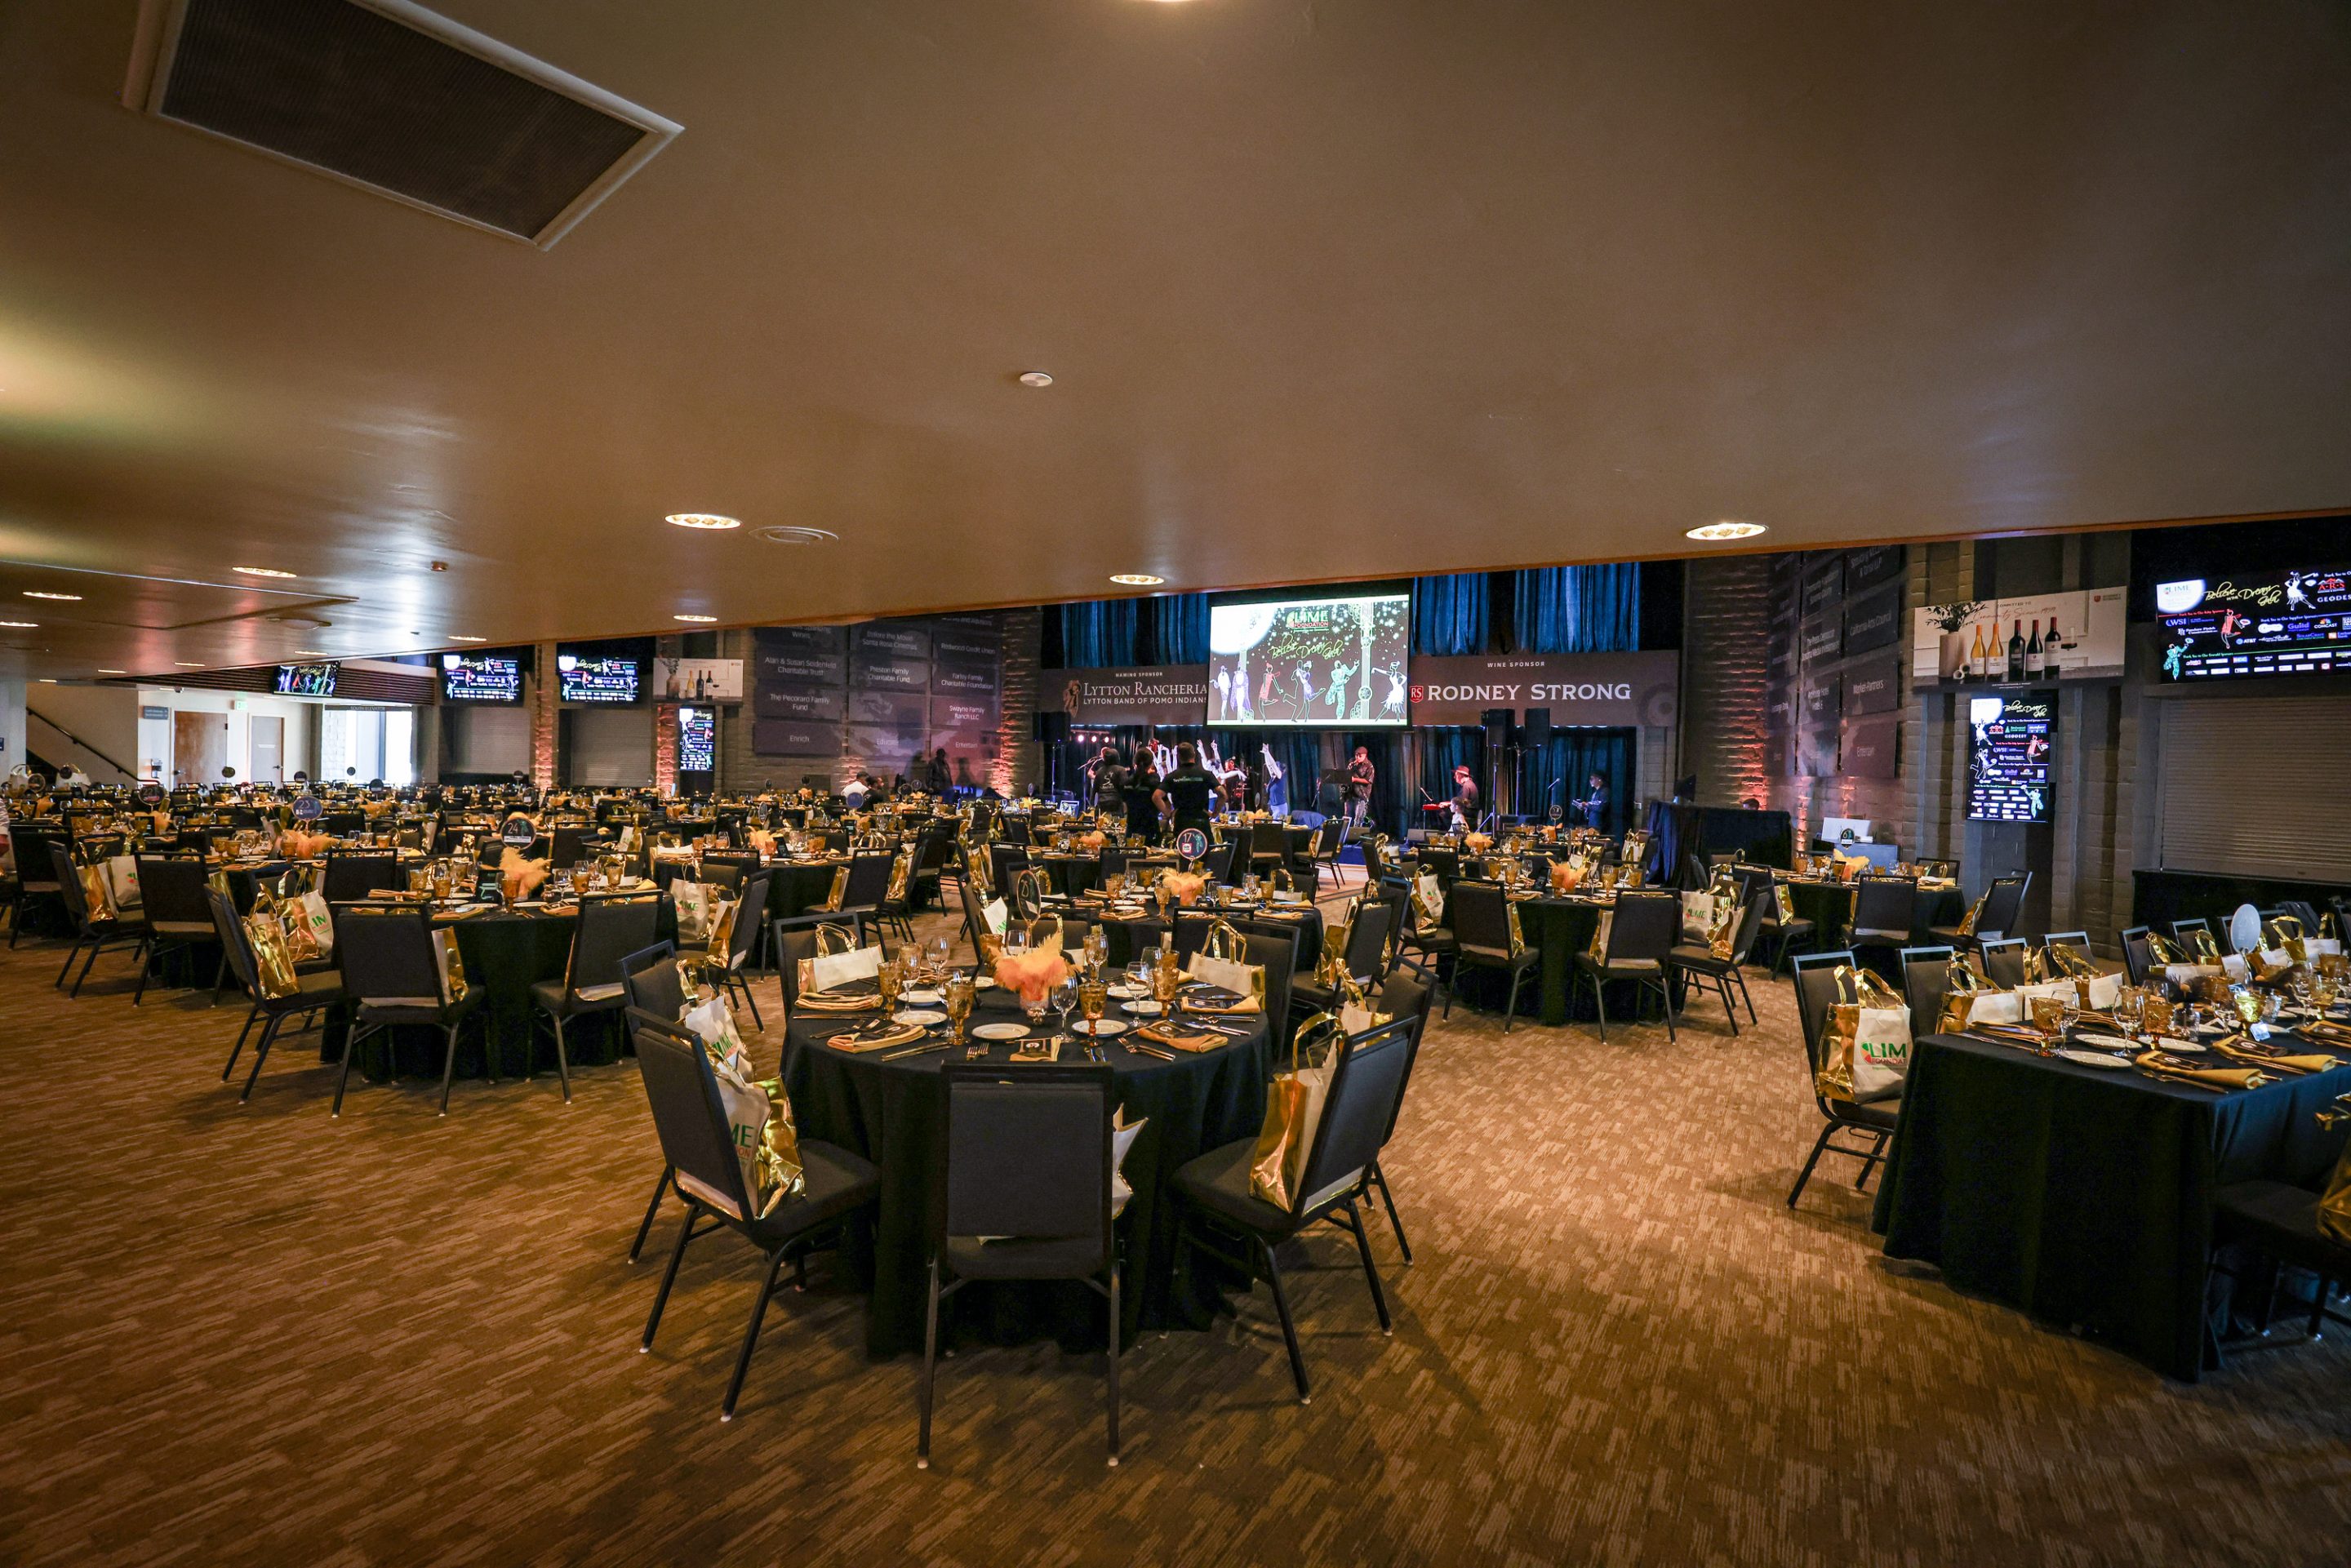 A large banquet room with tables and chairs available for Sonoma County Non-Profit Organizations.